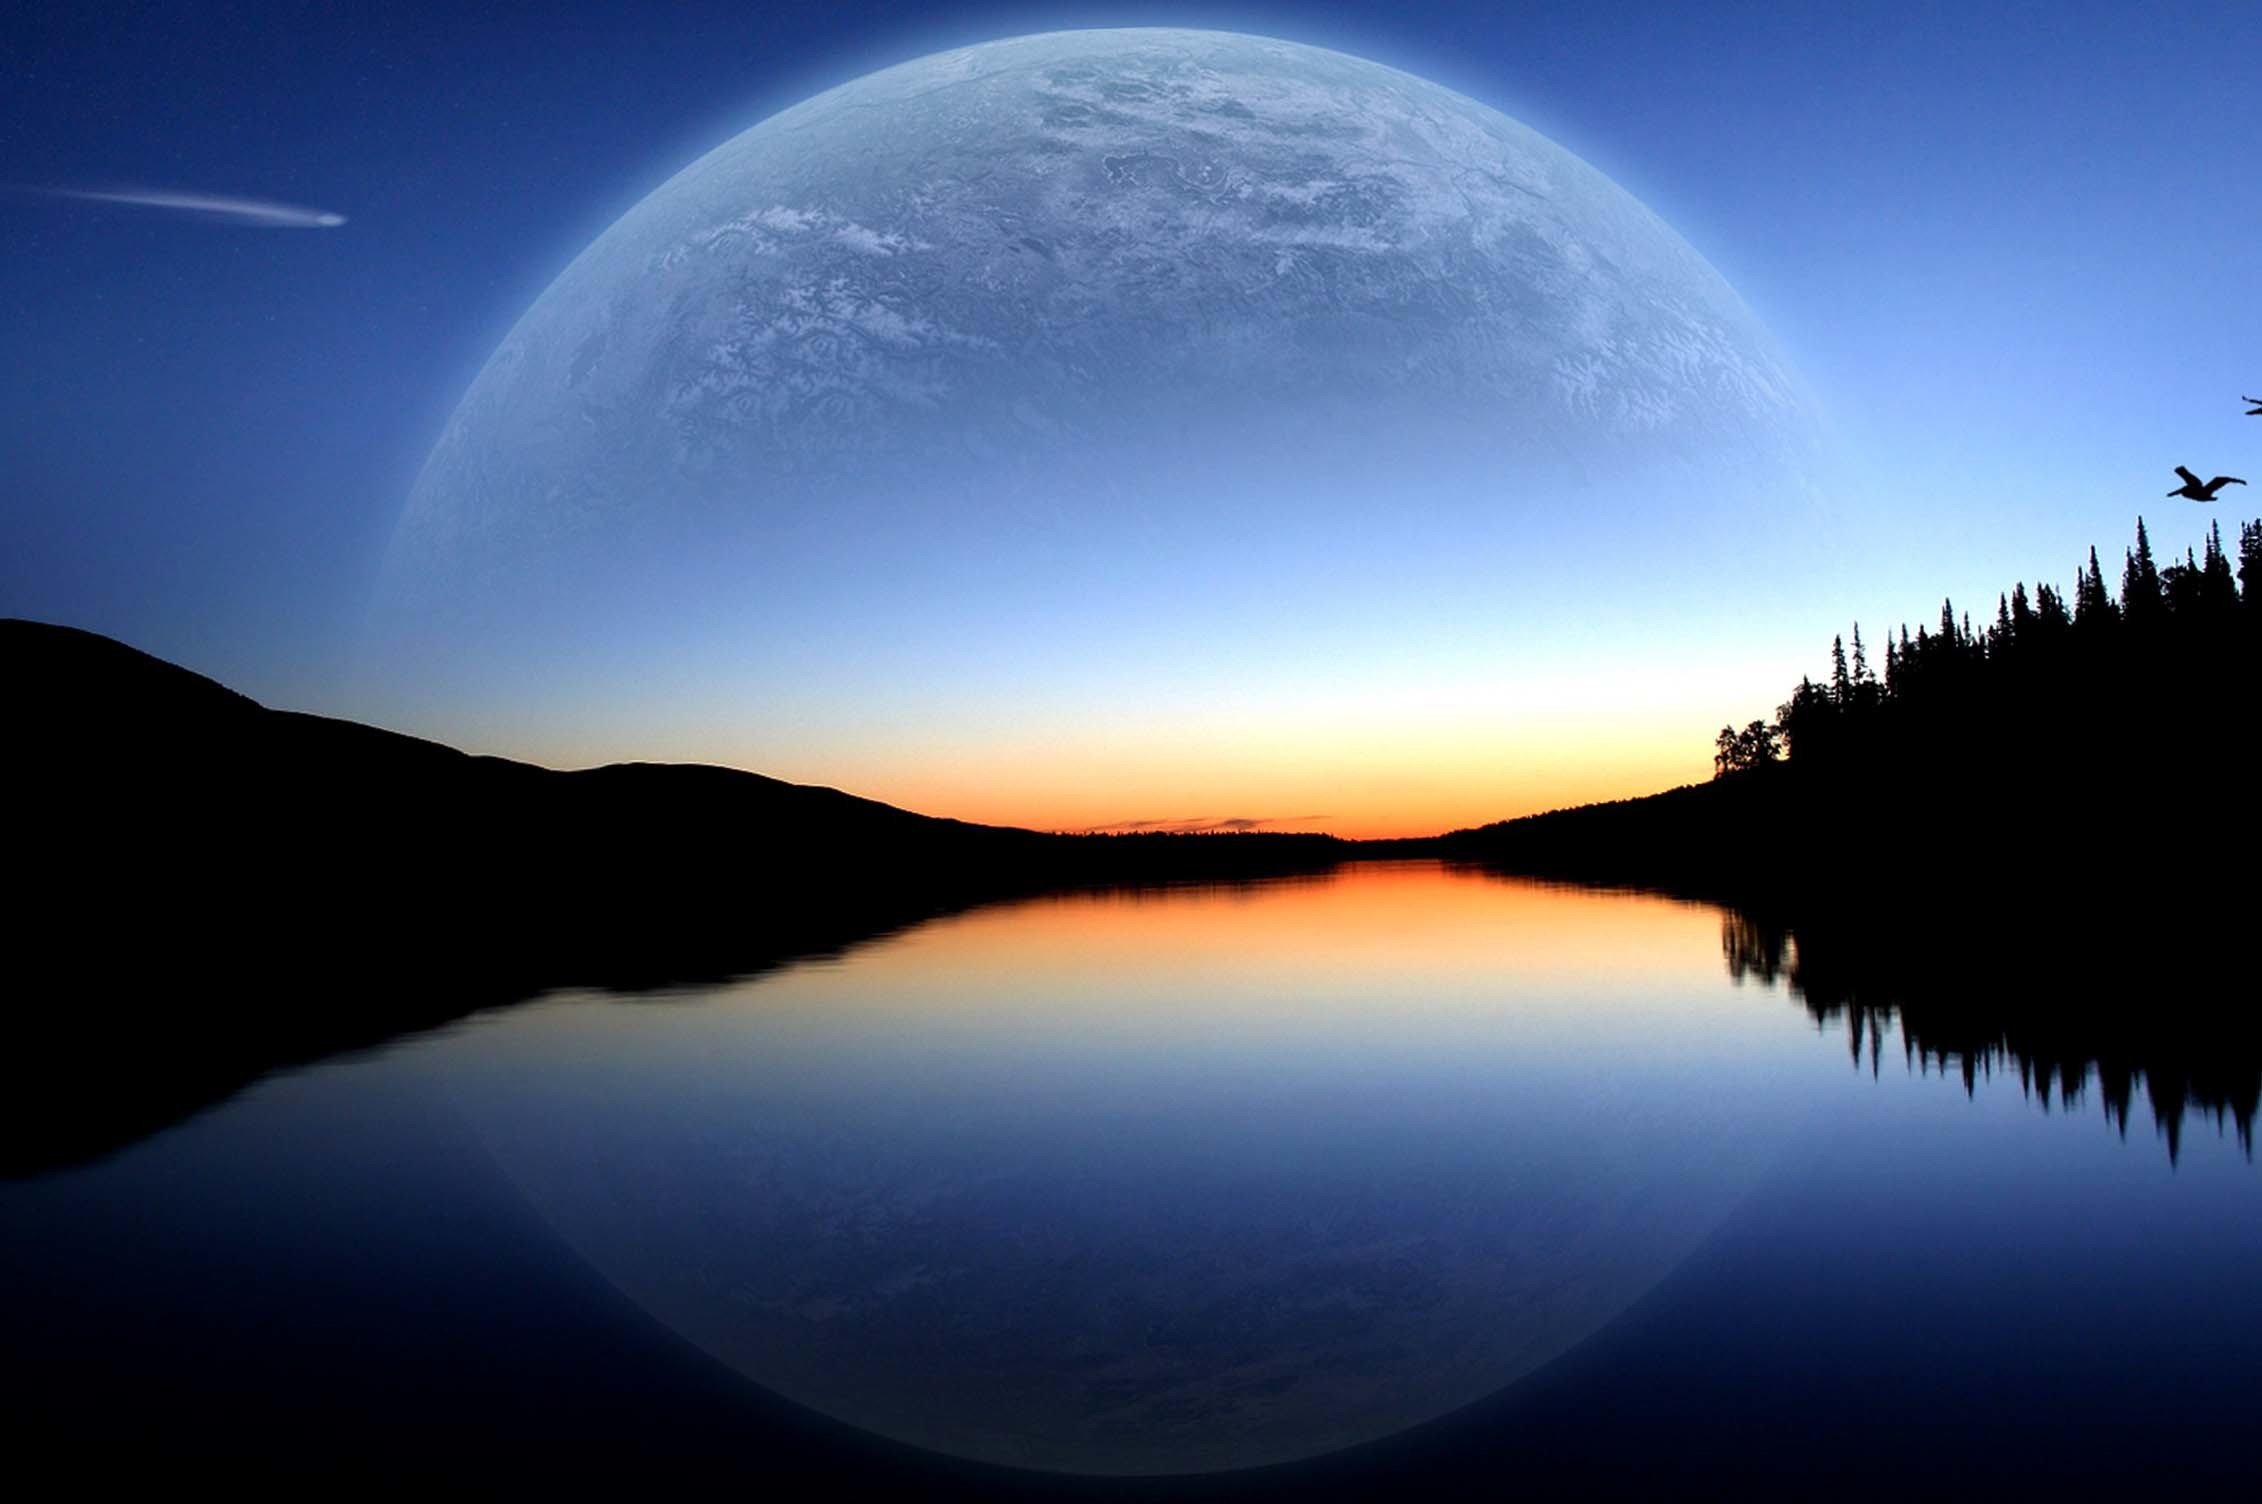 cool nature wallpapers hd,sky,nature,moon,natural landscape,reflection